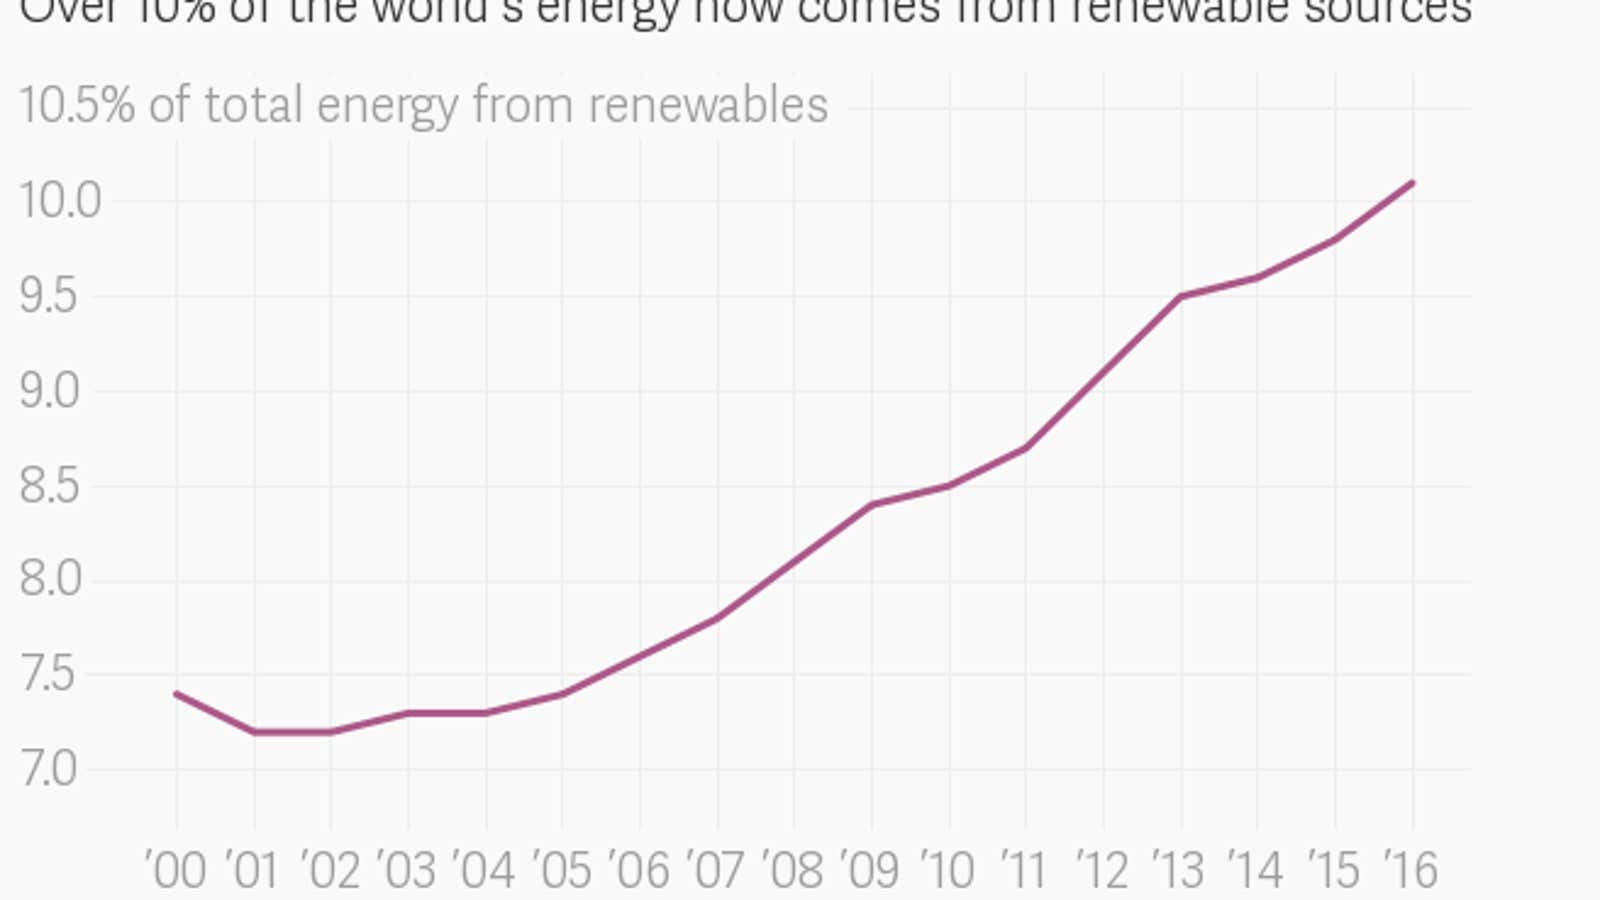 Over 10% of the world’s energy now comes from renewable sources